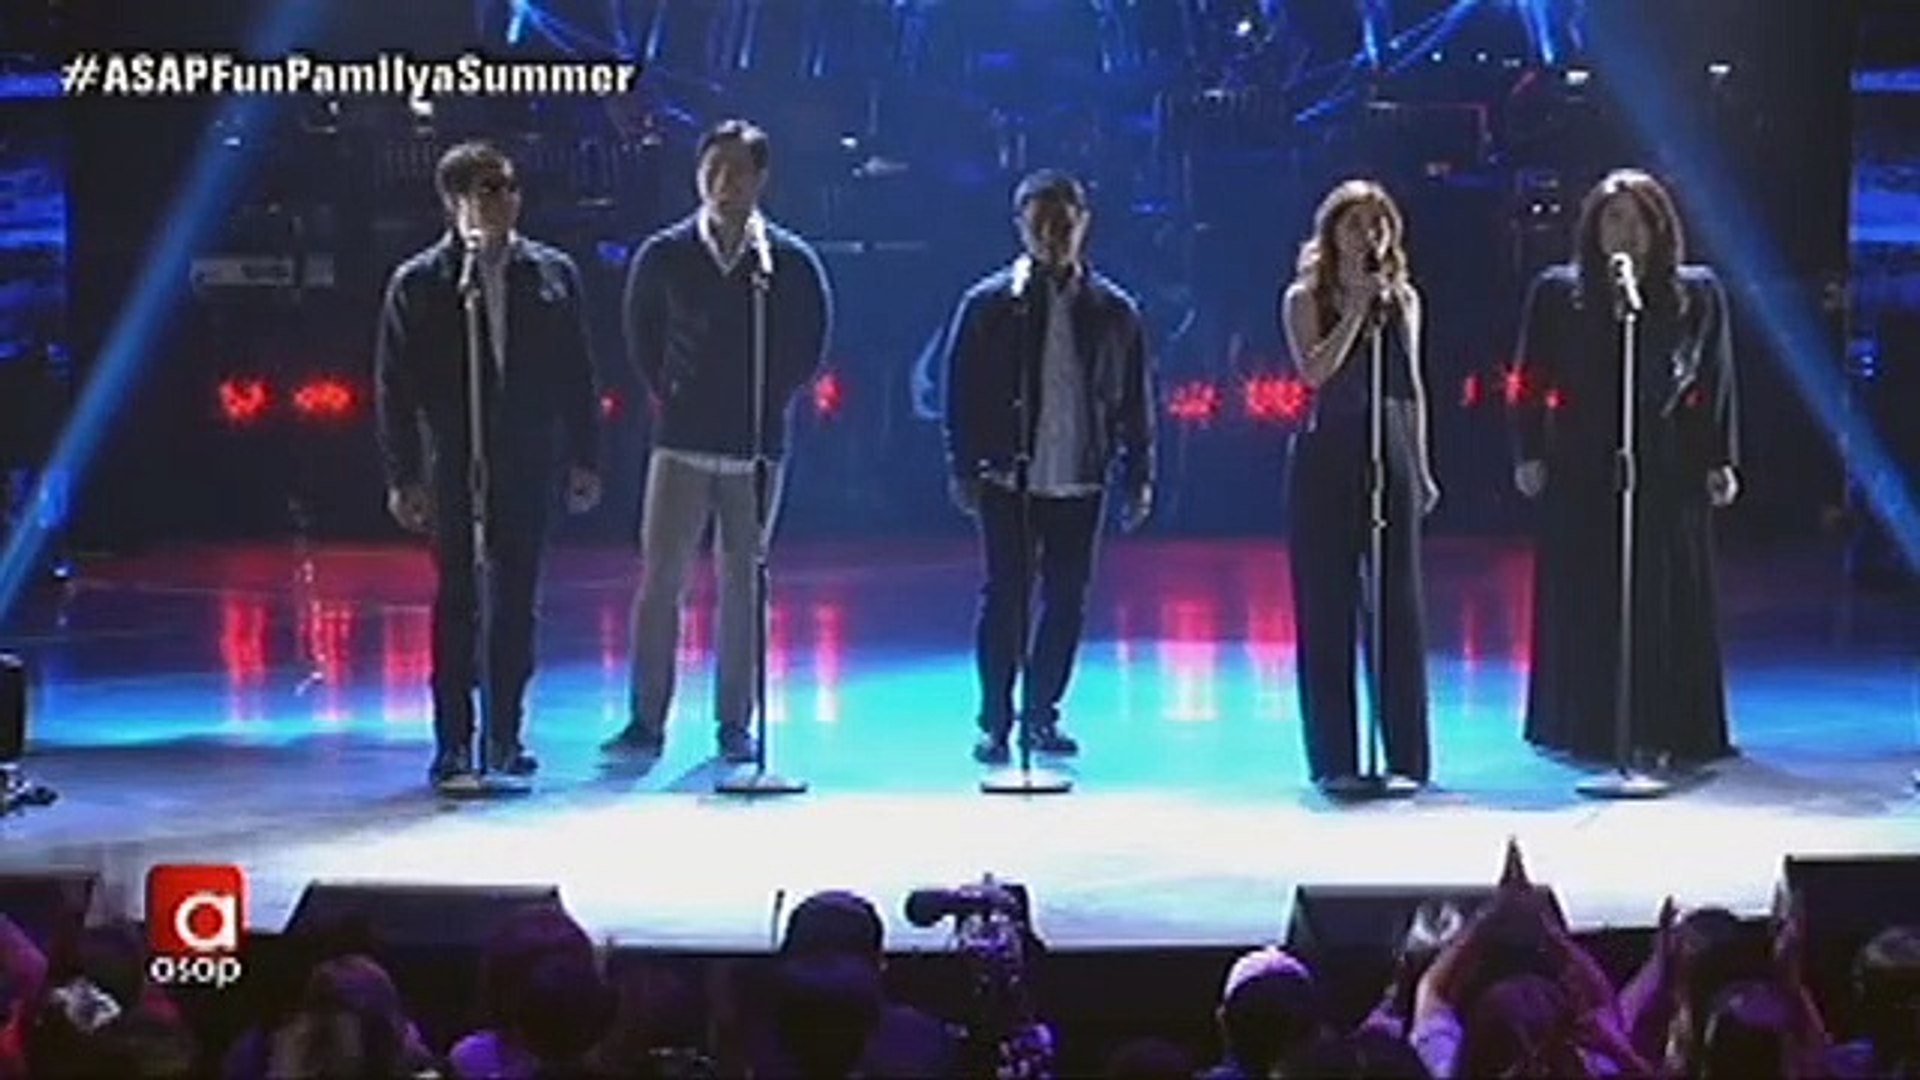 OPM Hitmakers Ogie, Randy, Piolo, Kyla and Joanne Lorenzana in a throwback OPM performance